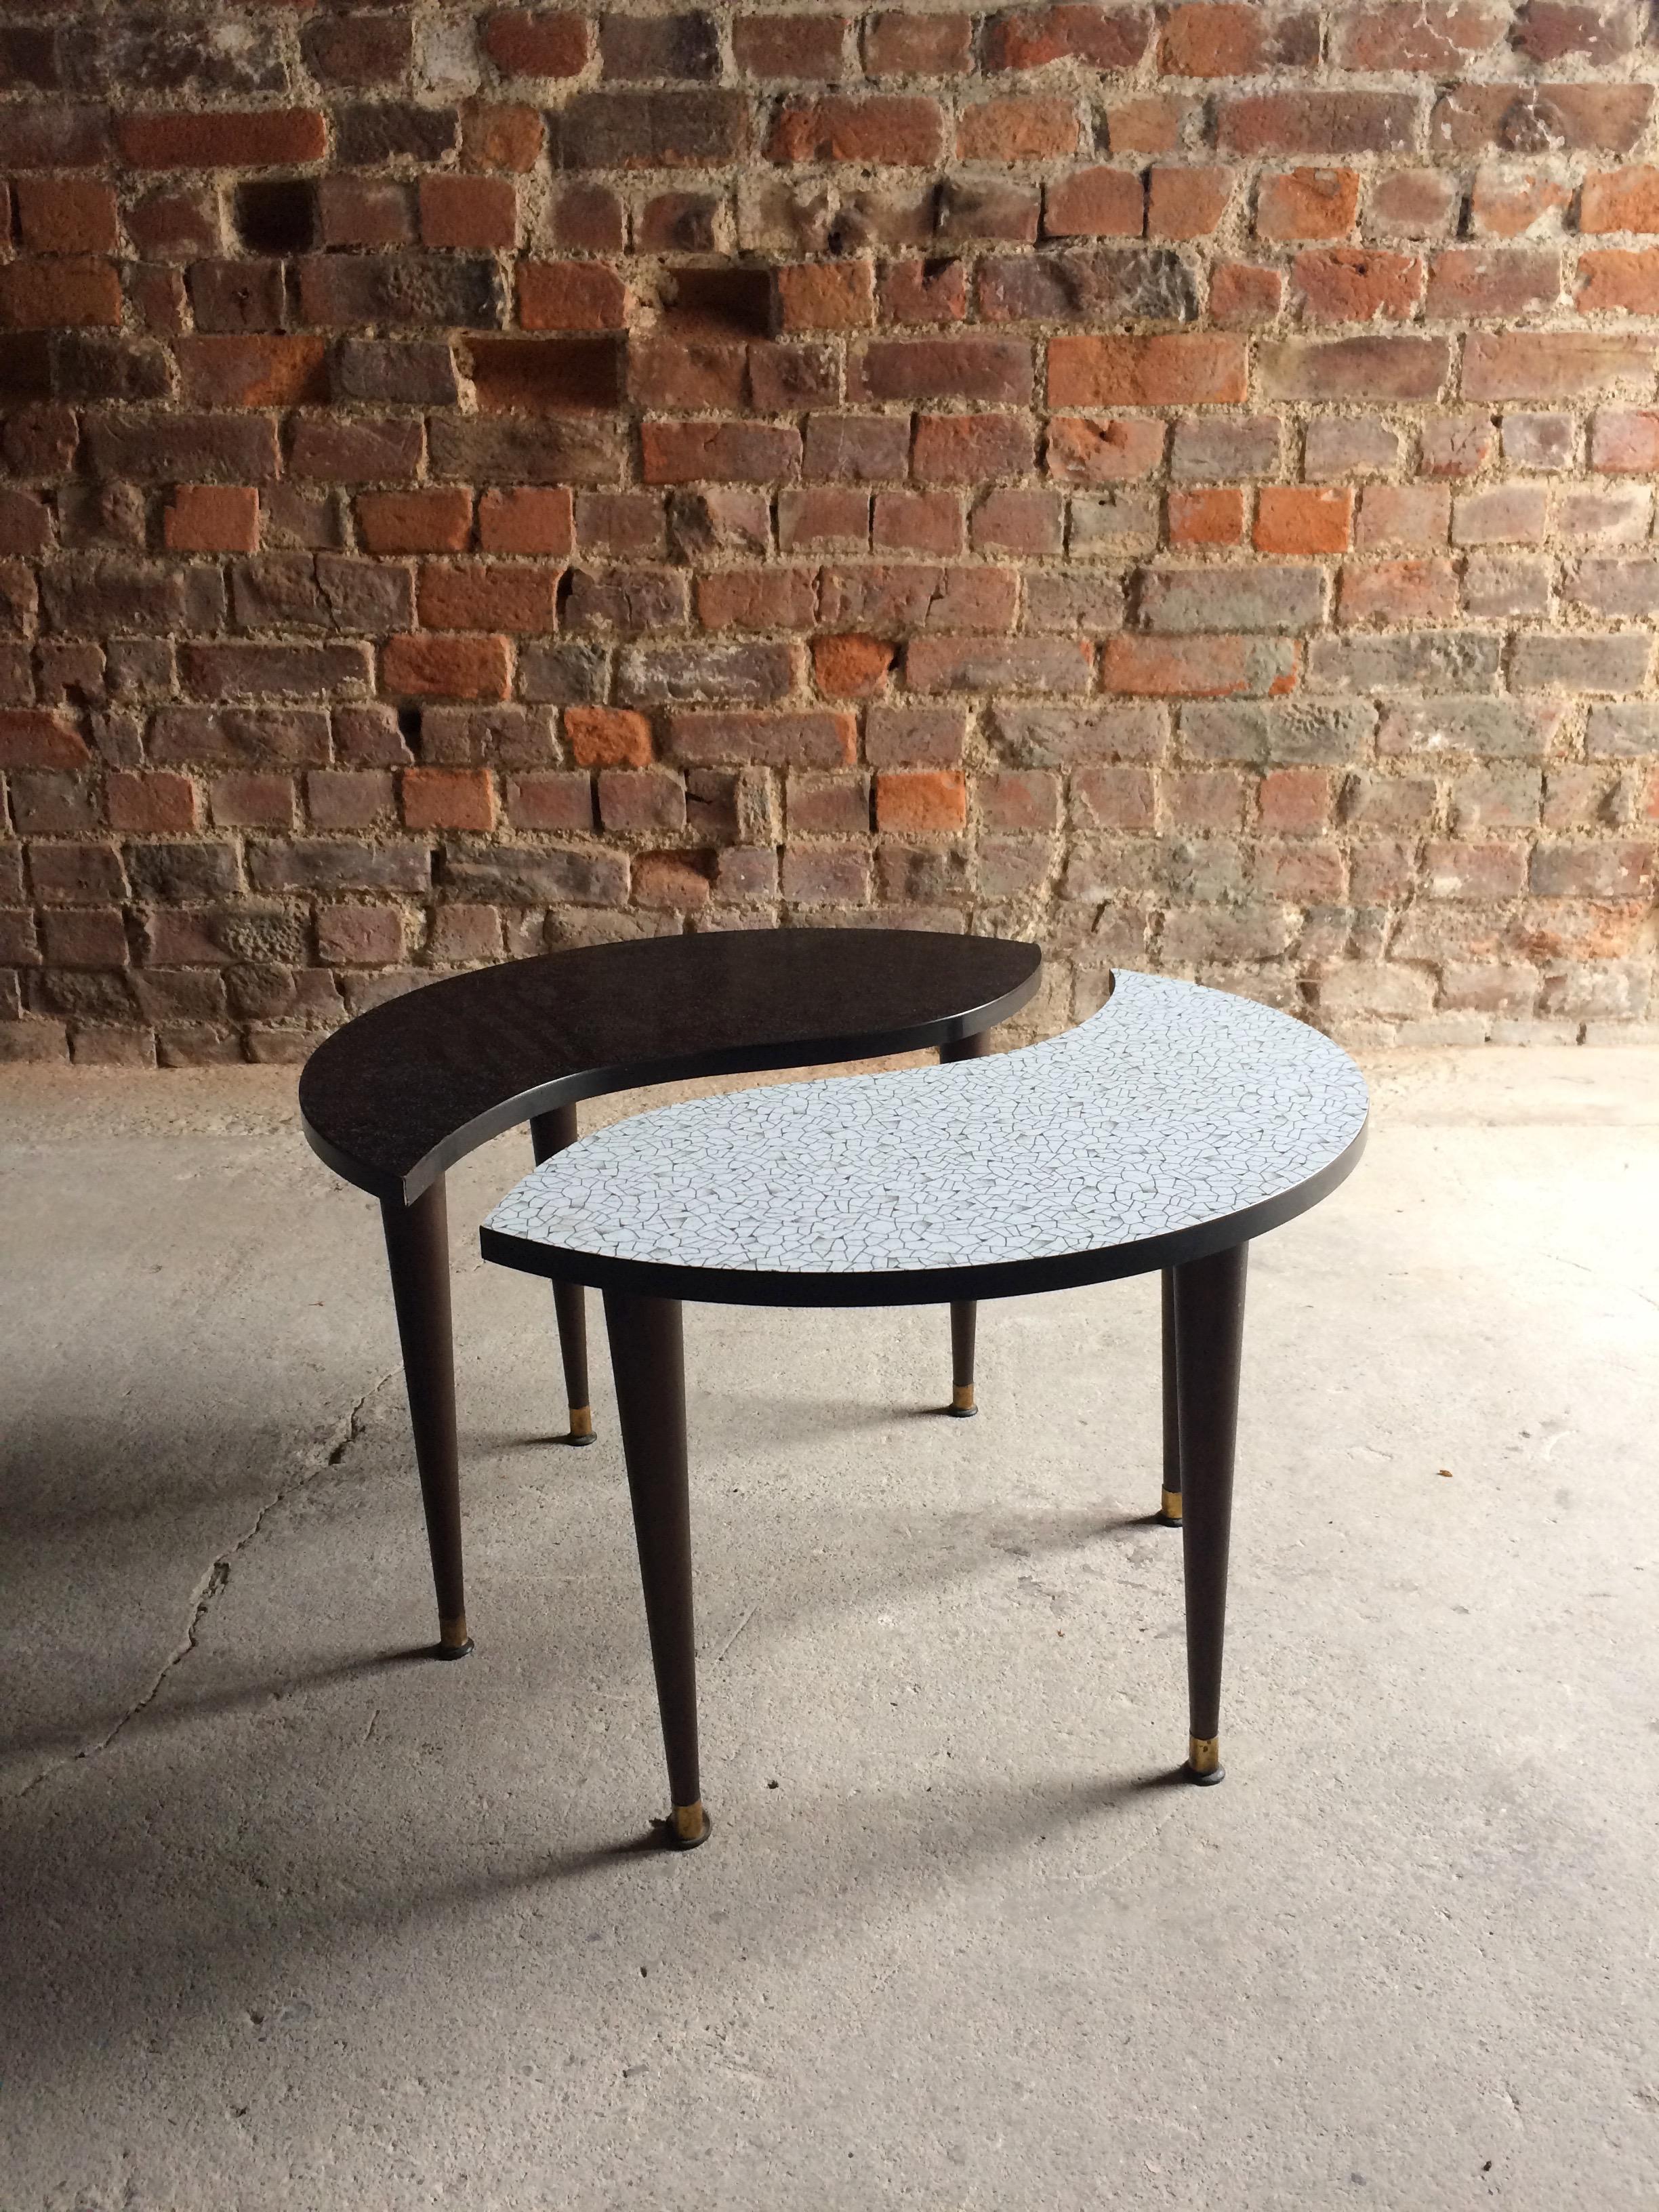 A magnificent and very beautiful Yin & Yang tripod occasional table, circa 1950s, the circular top showing both sides of Yin & Yang, the tables separate in two on tripod legs with brass ends.

Condition: This item is offered in excellent vintage